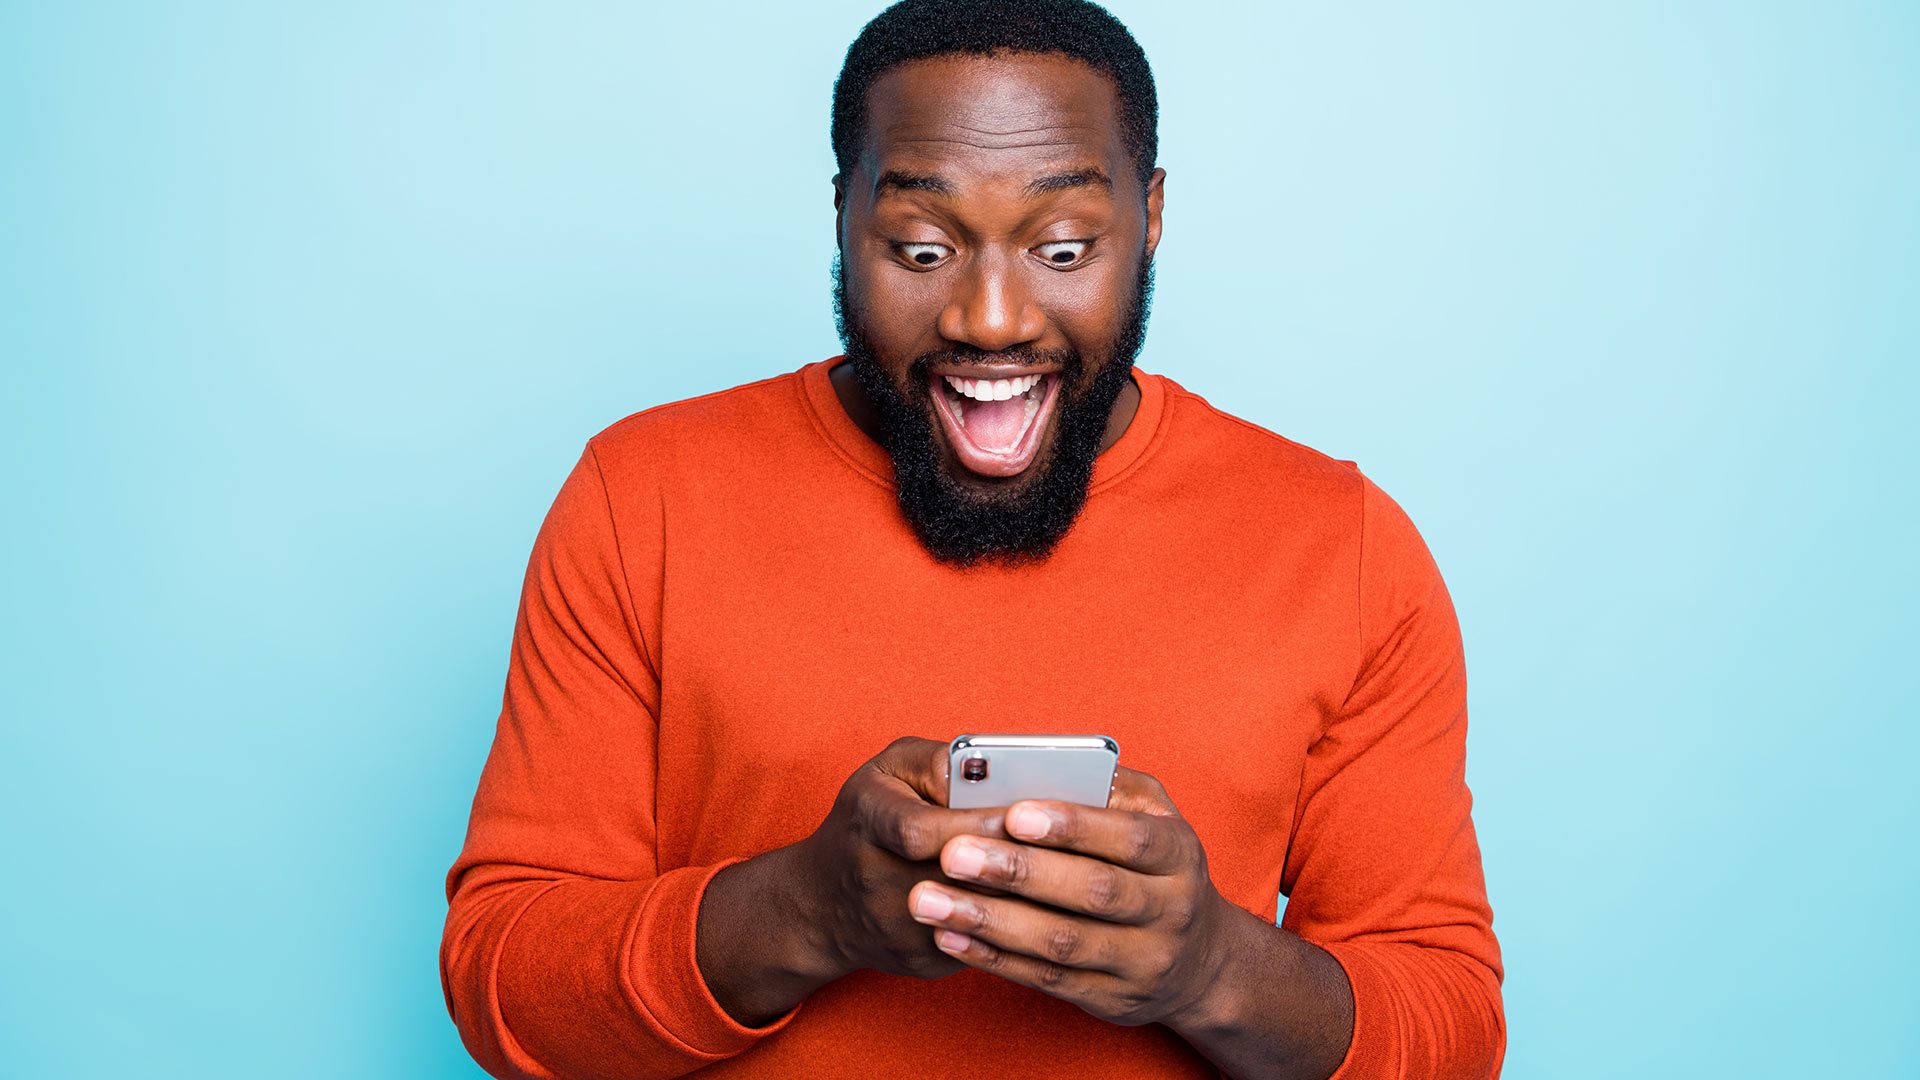 Brunette man in orange long-sleeve shirt, holding his phone with both hands and looking at it excited. Light blue background.